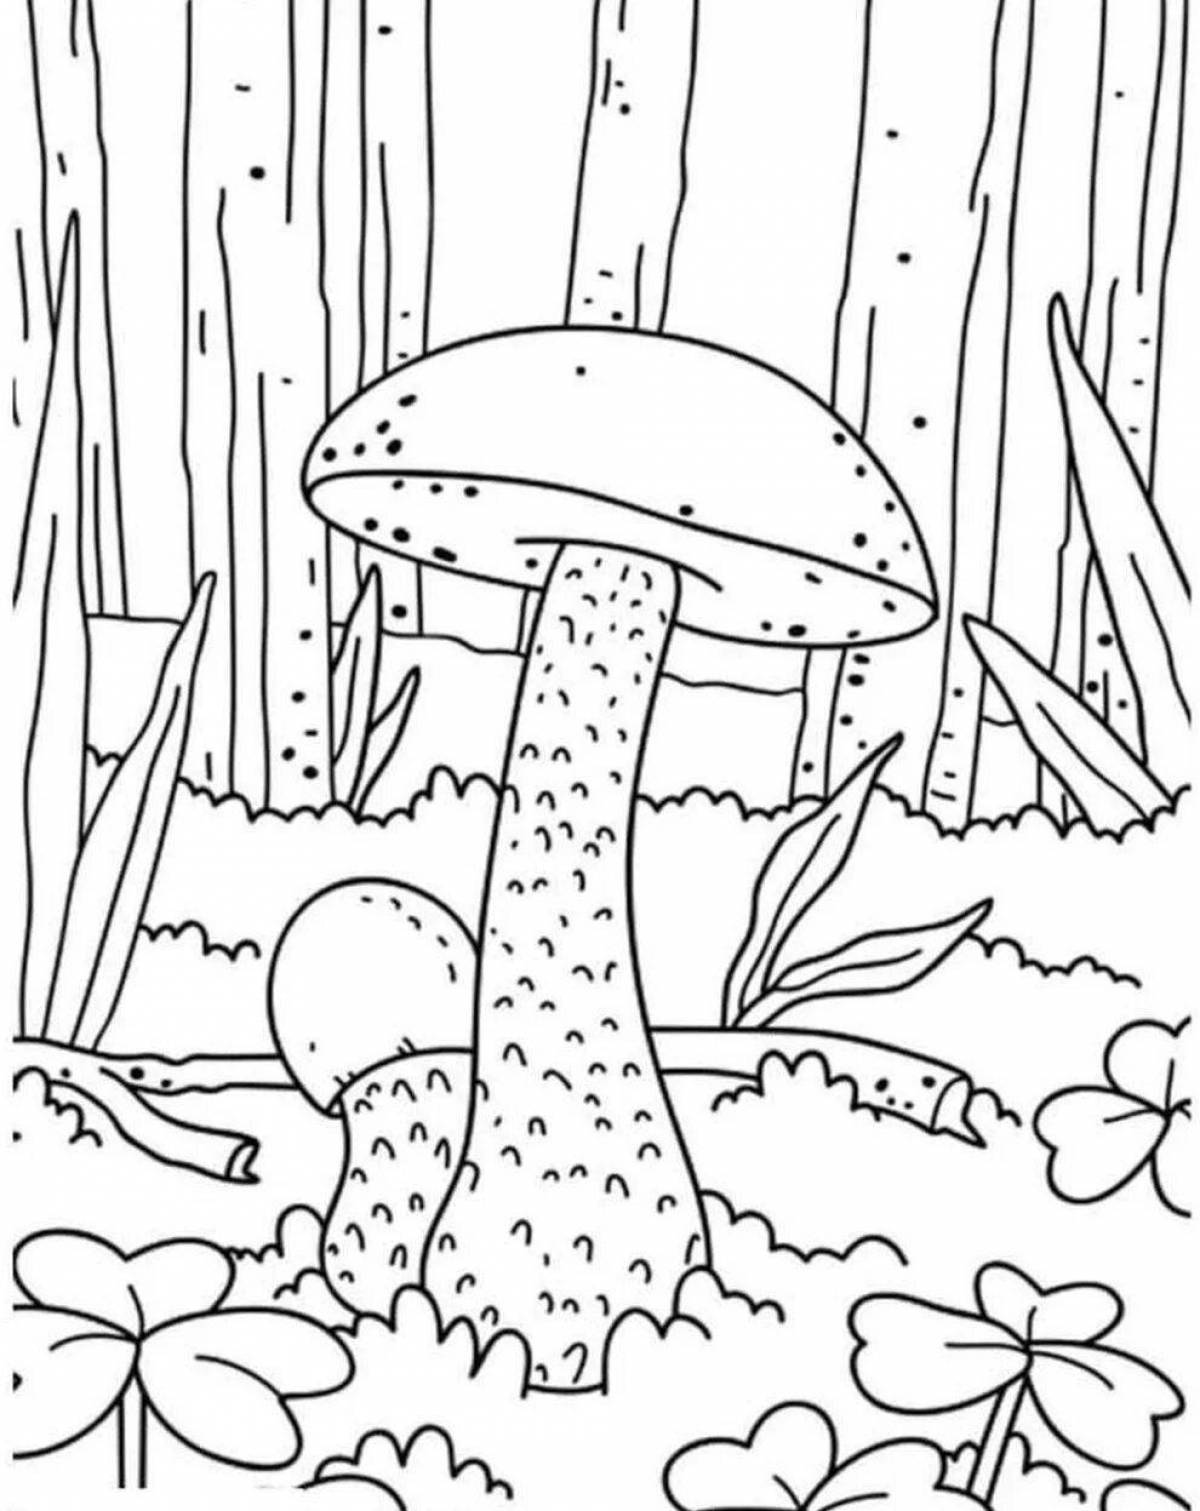 Coloring book glowing red fly agaric